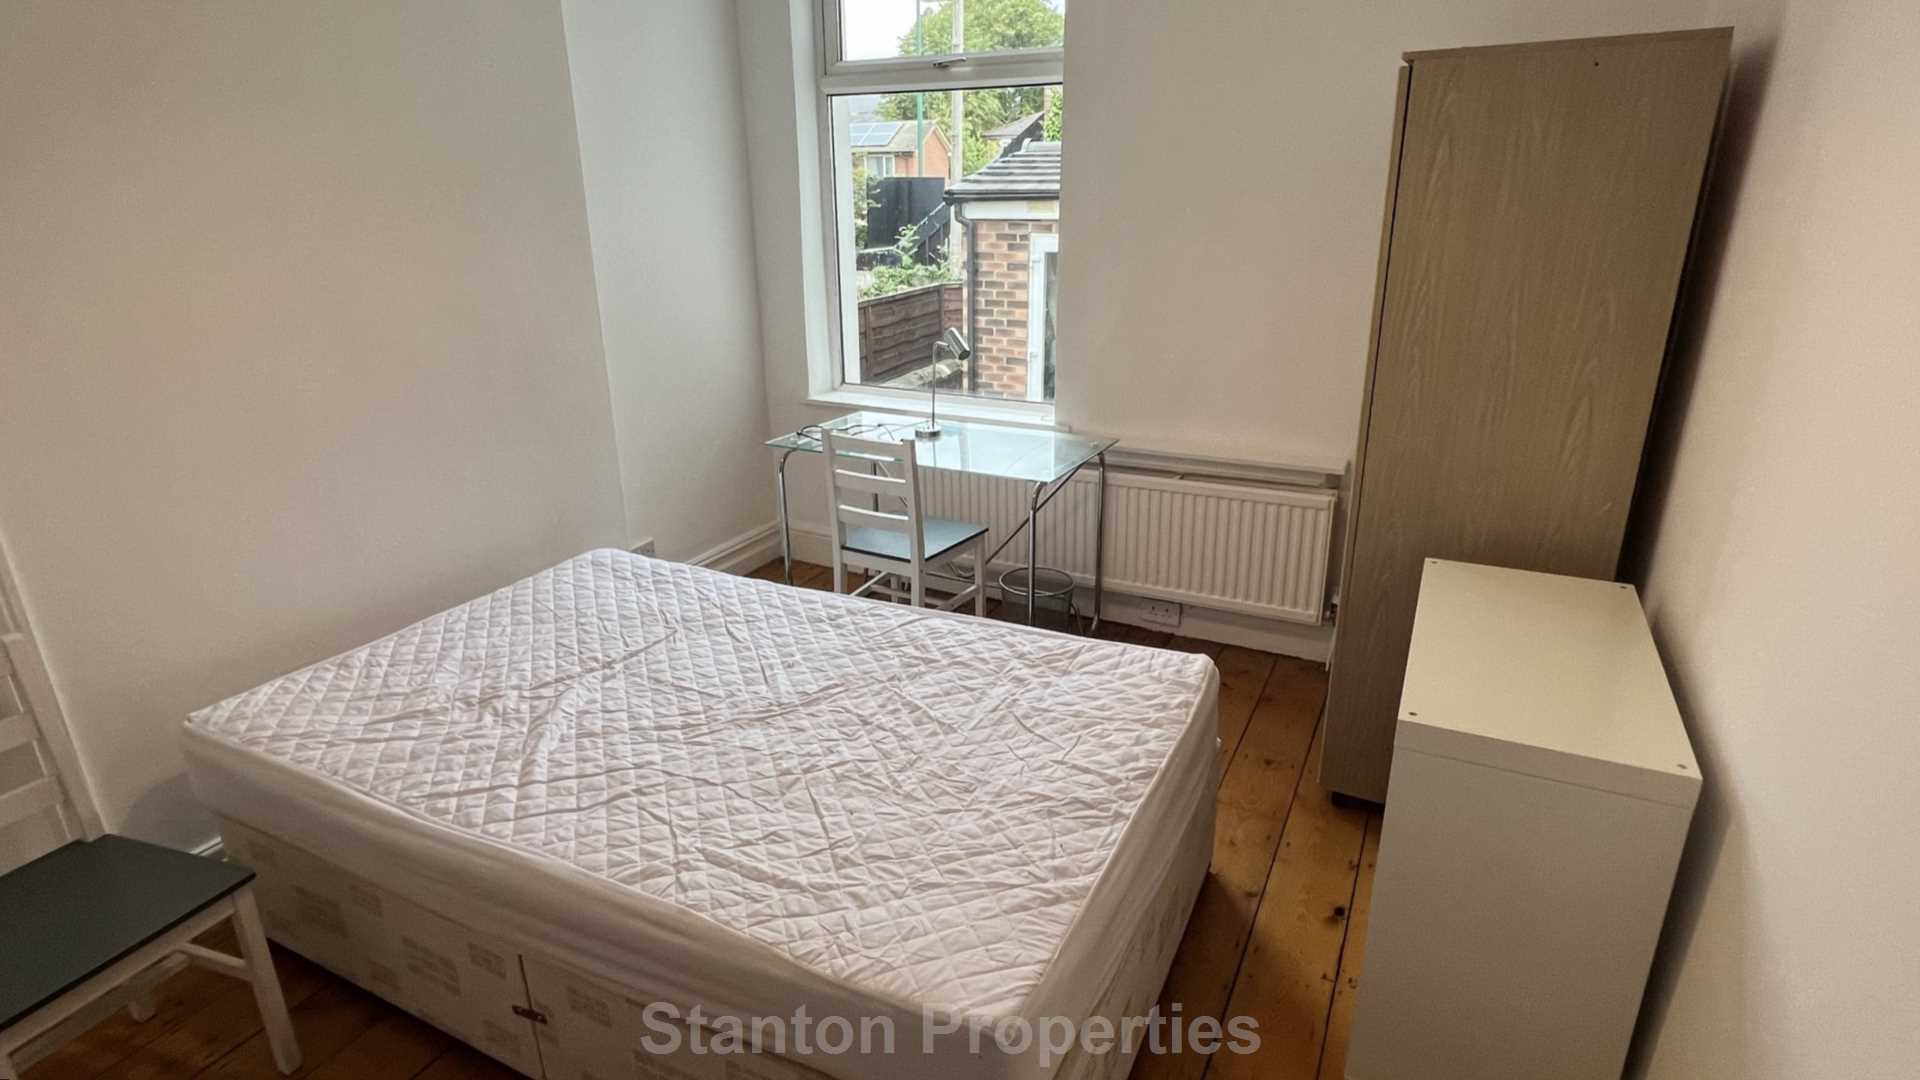 £150 PER WEEK / £650 PER MONTH, Lombard Grove, Manchester, Image 17